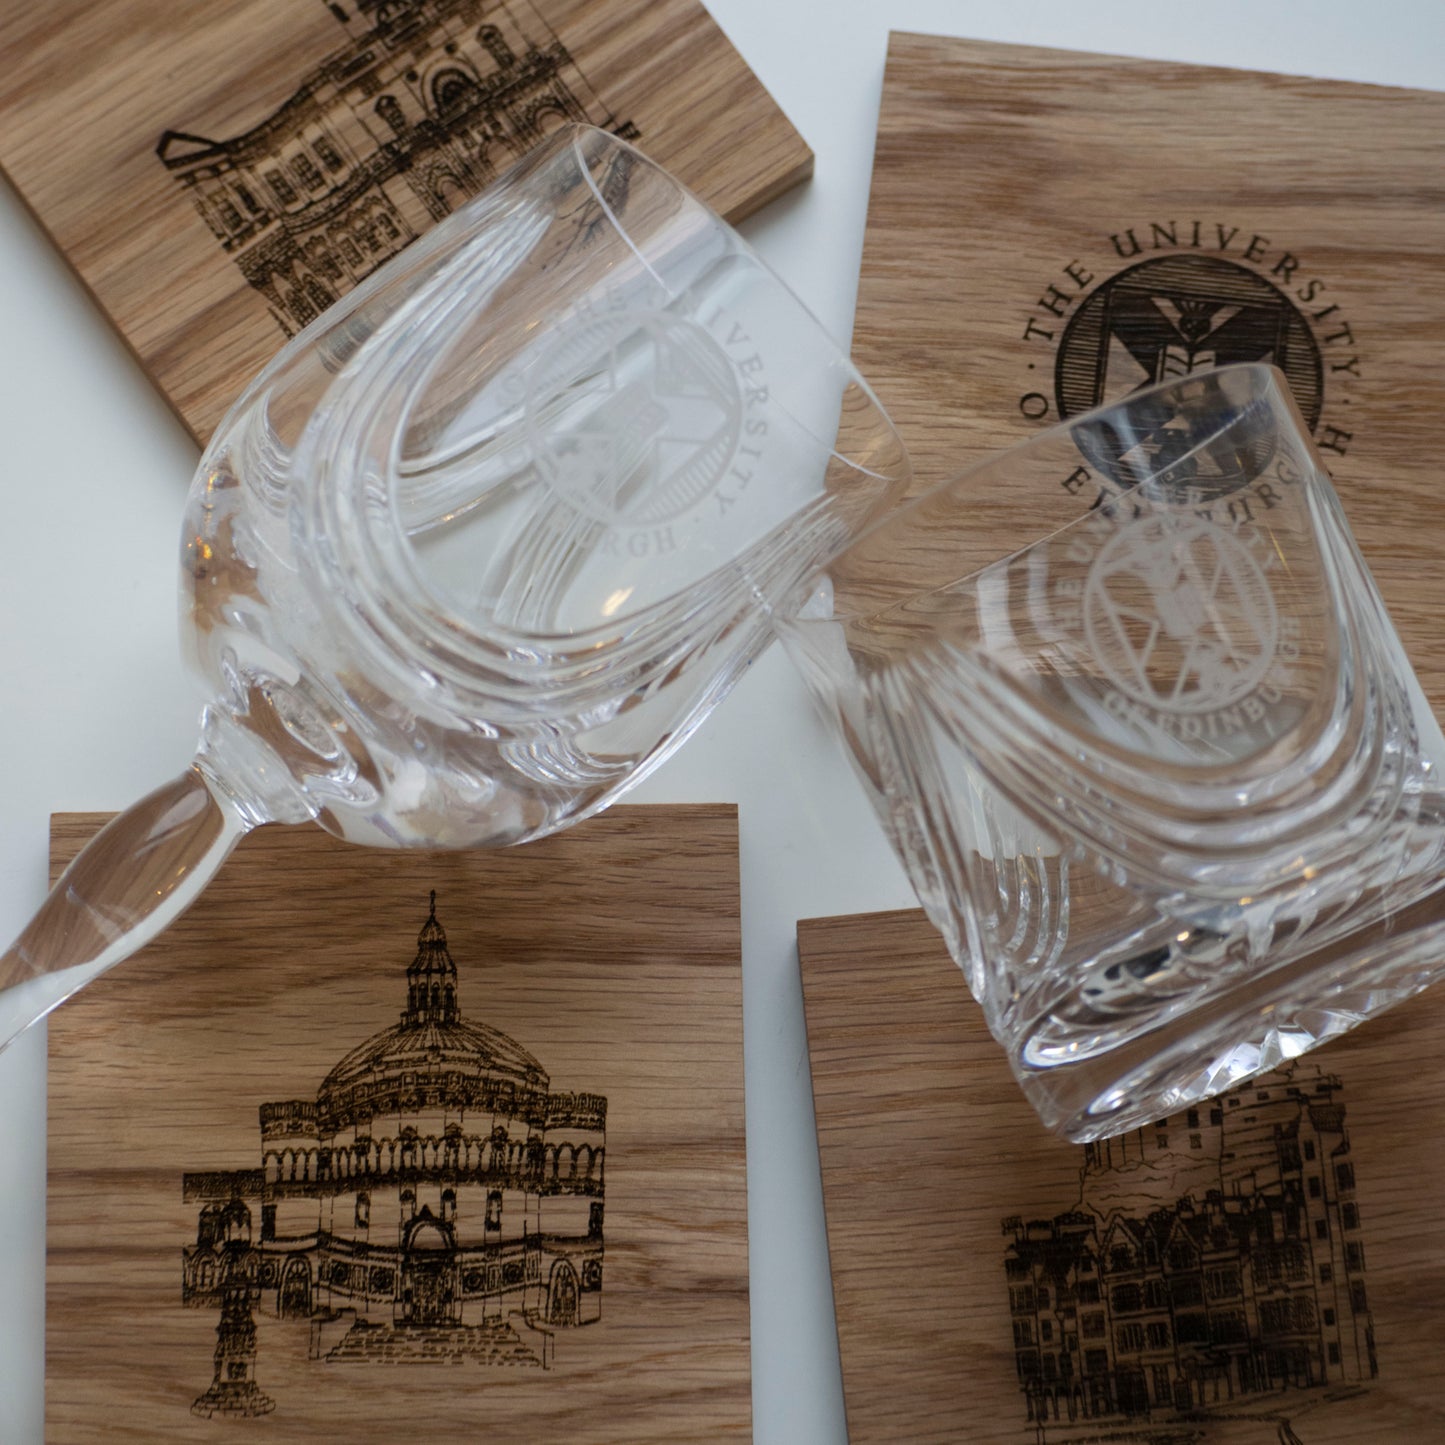 Engraved Wooden Coaster set with our Crystal Wine and Whisky glasses.